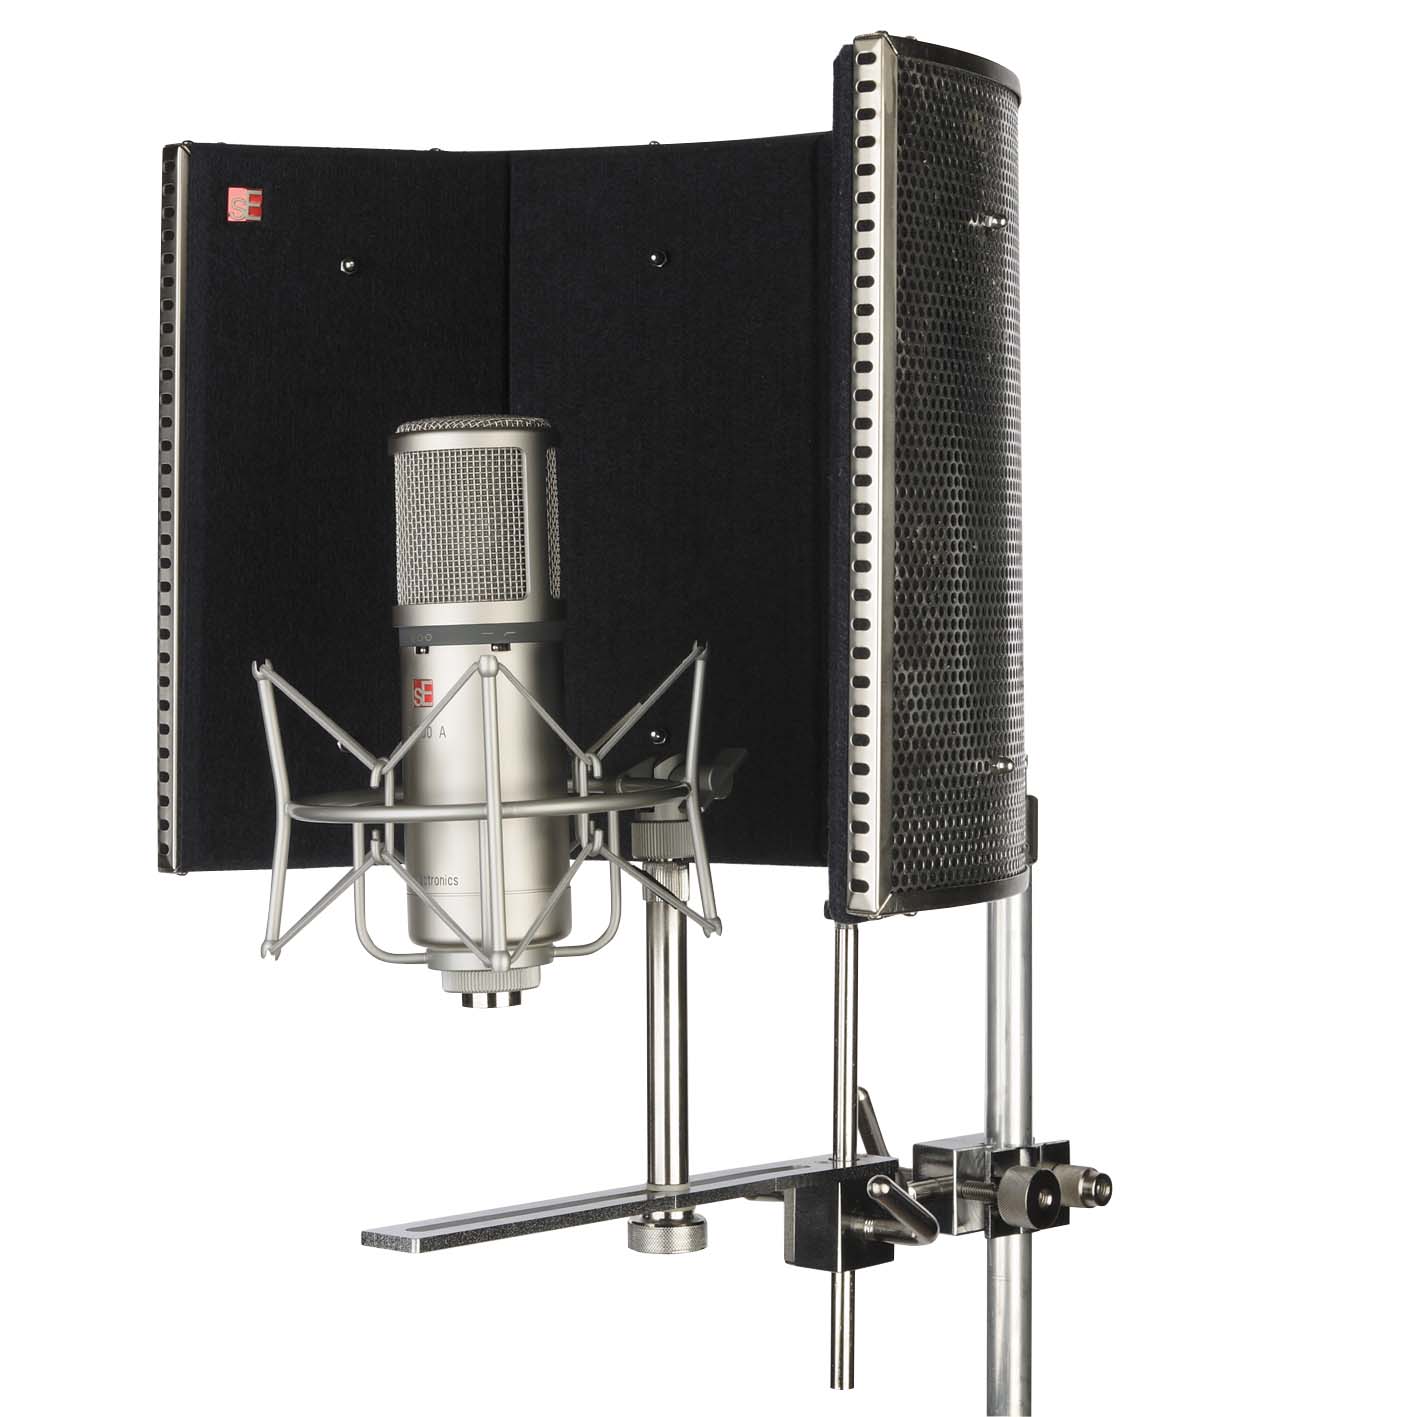 Reflexion Filter (microphone not included)